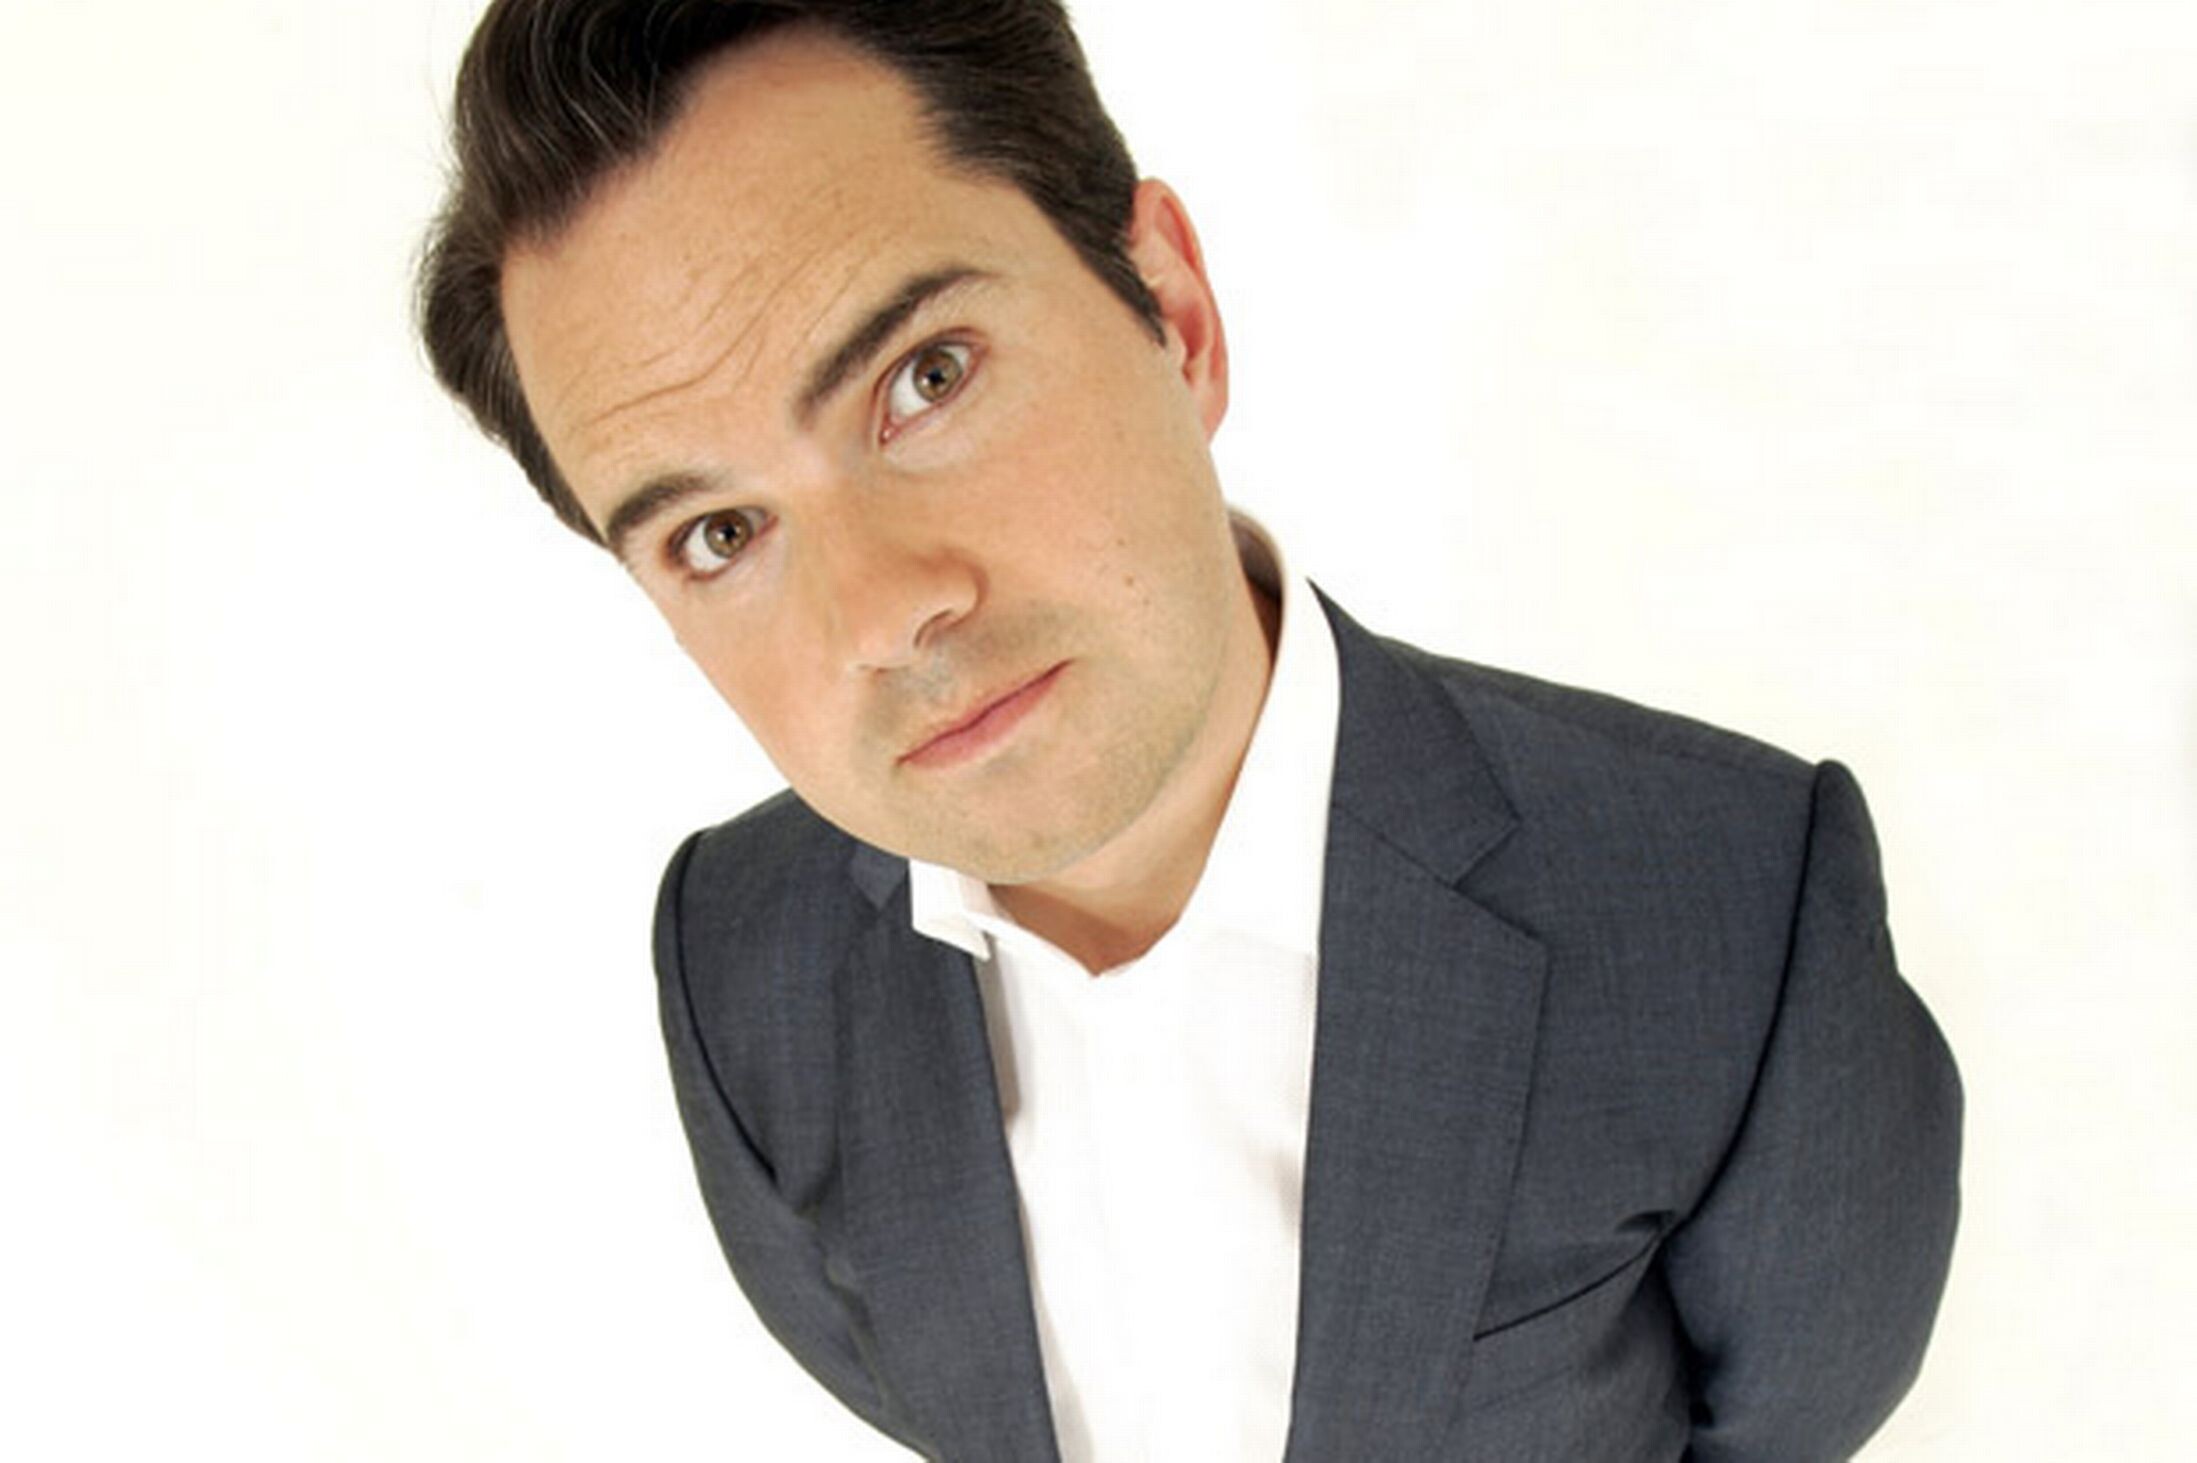 Jimmy Carr: Outrageous comedian known for his deadpan delivery, An illustrious career, Terribly Funny tour. 2200x1470 HD Wallpaper.